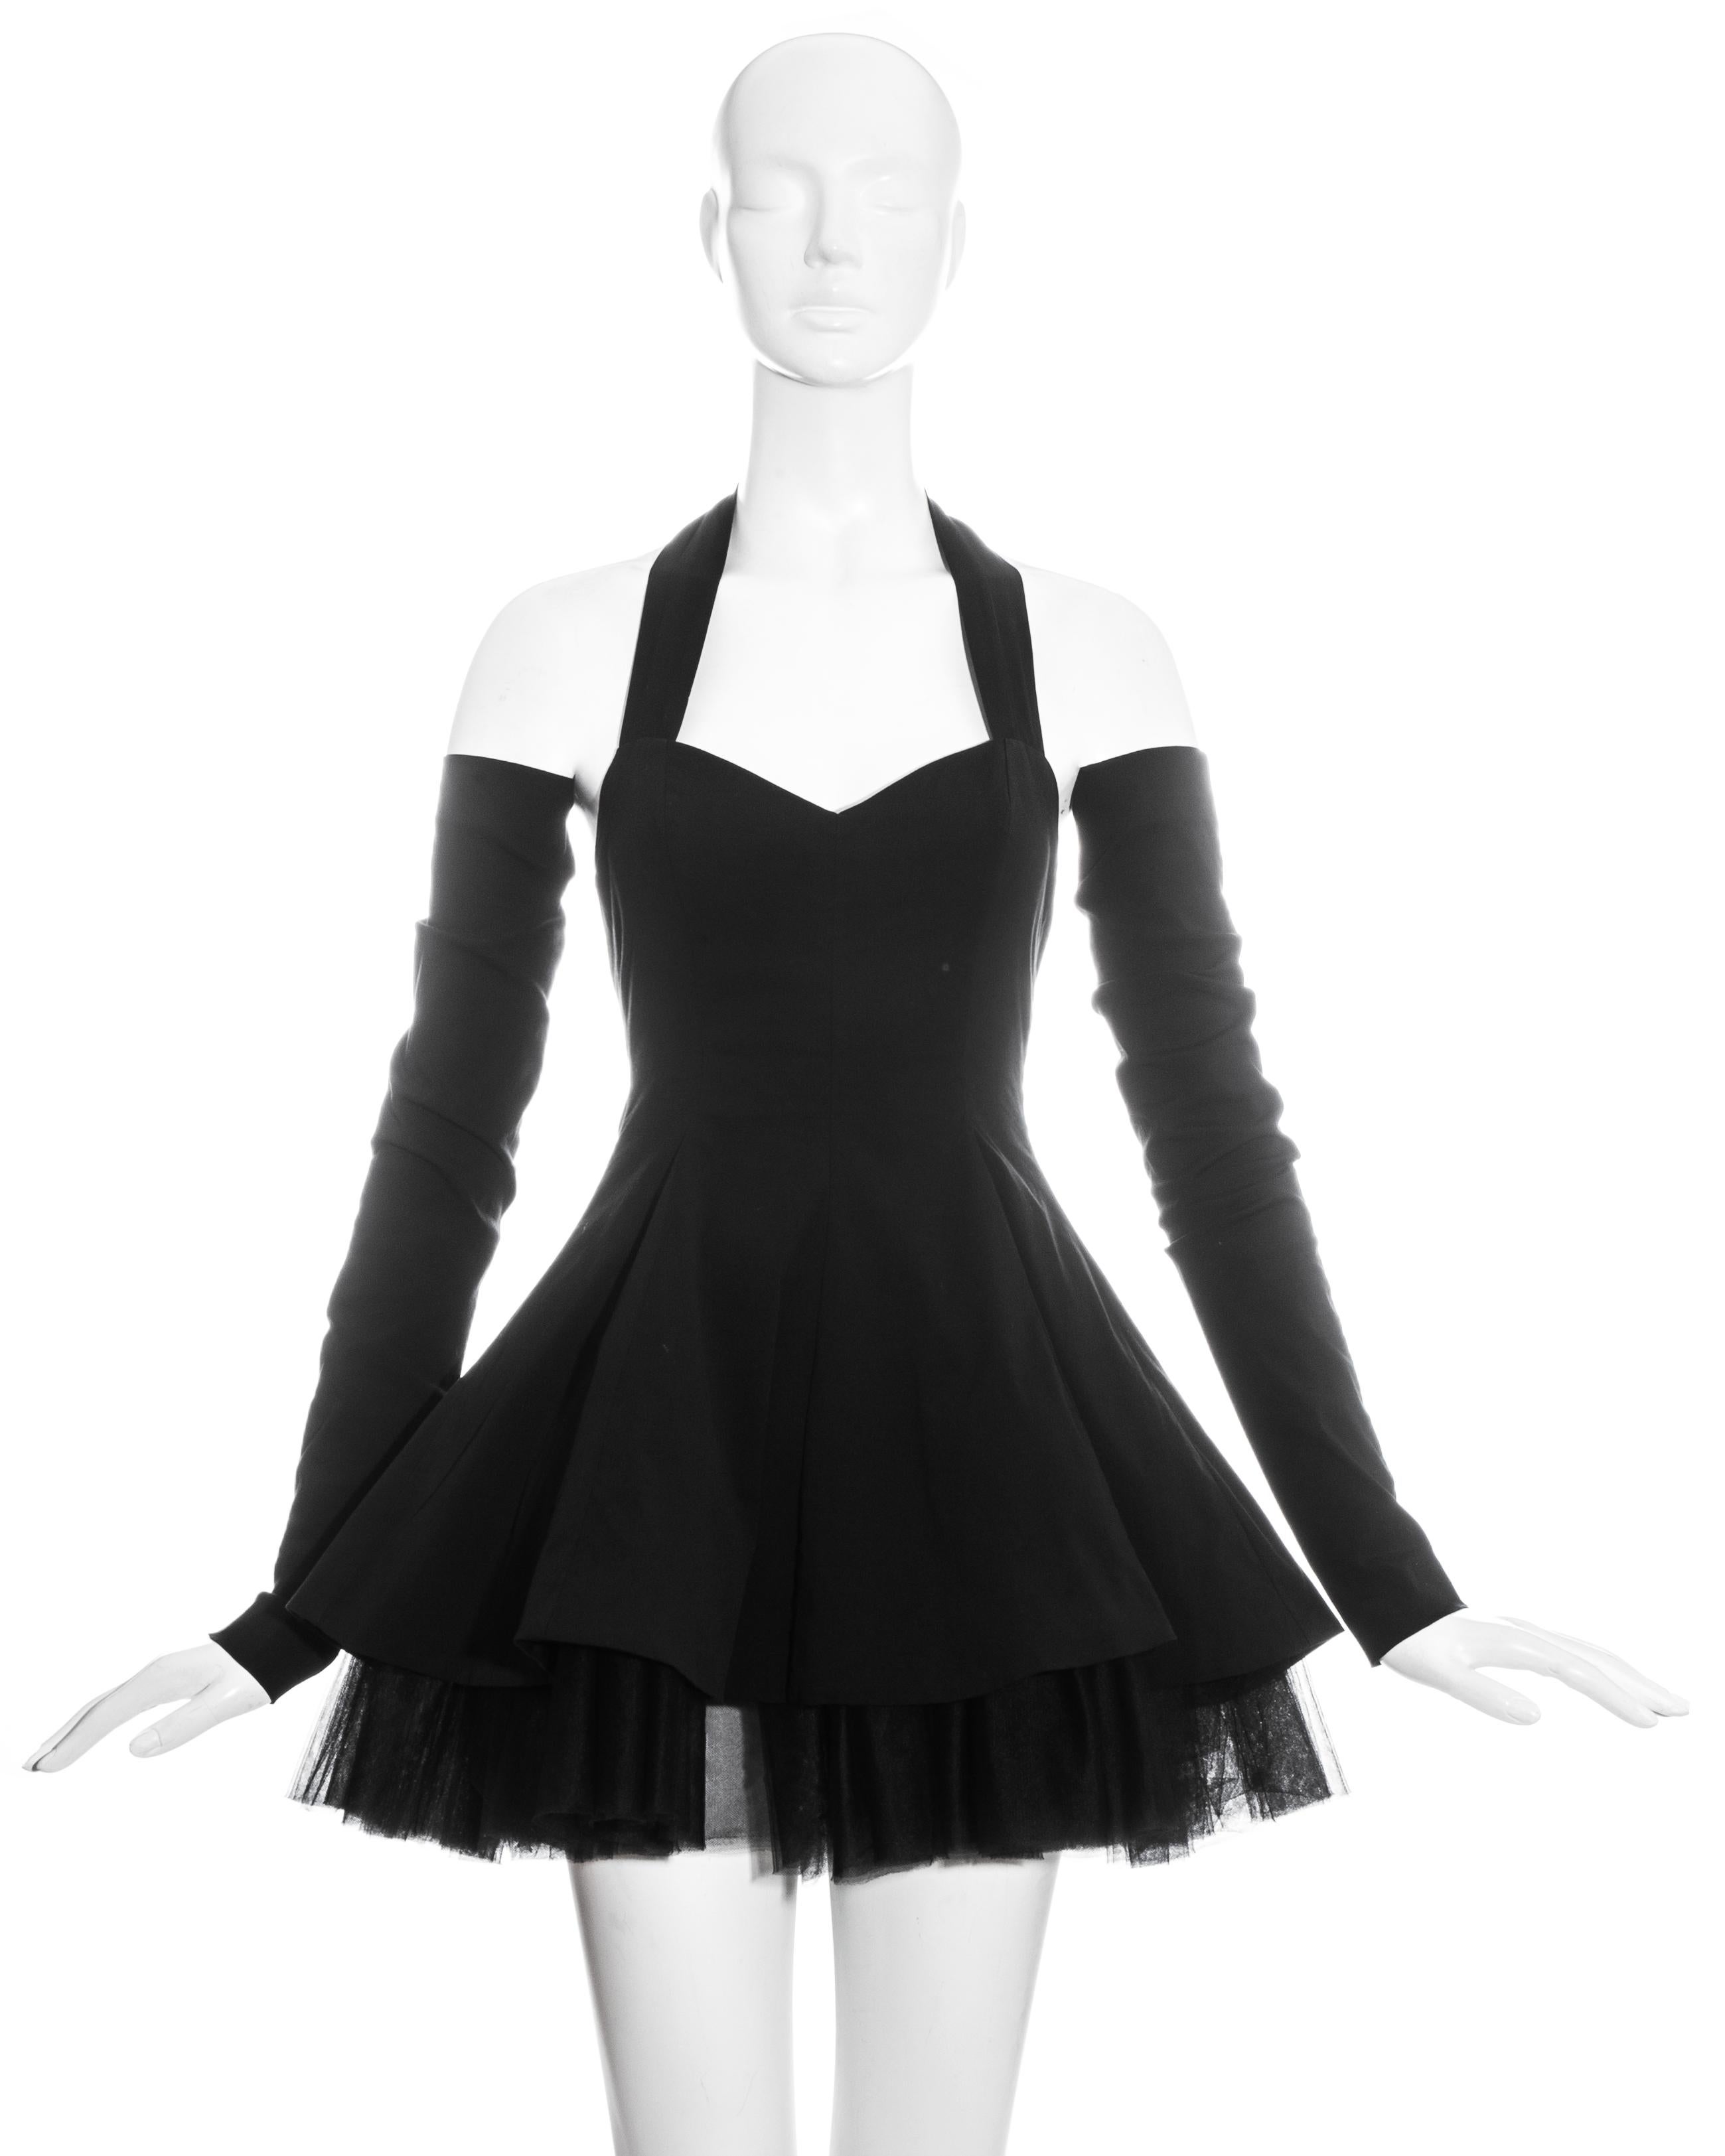 Dolce & Gabbana black cotton halter neck mini dress with tulle underskirt and separate sleeves.

Spring-Summer 1992